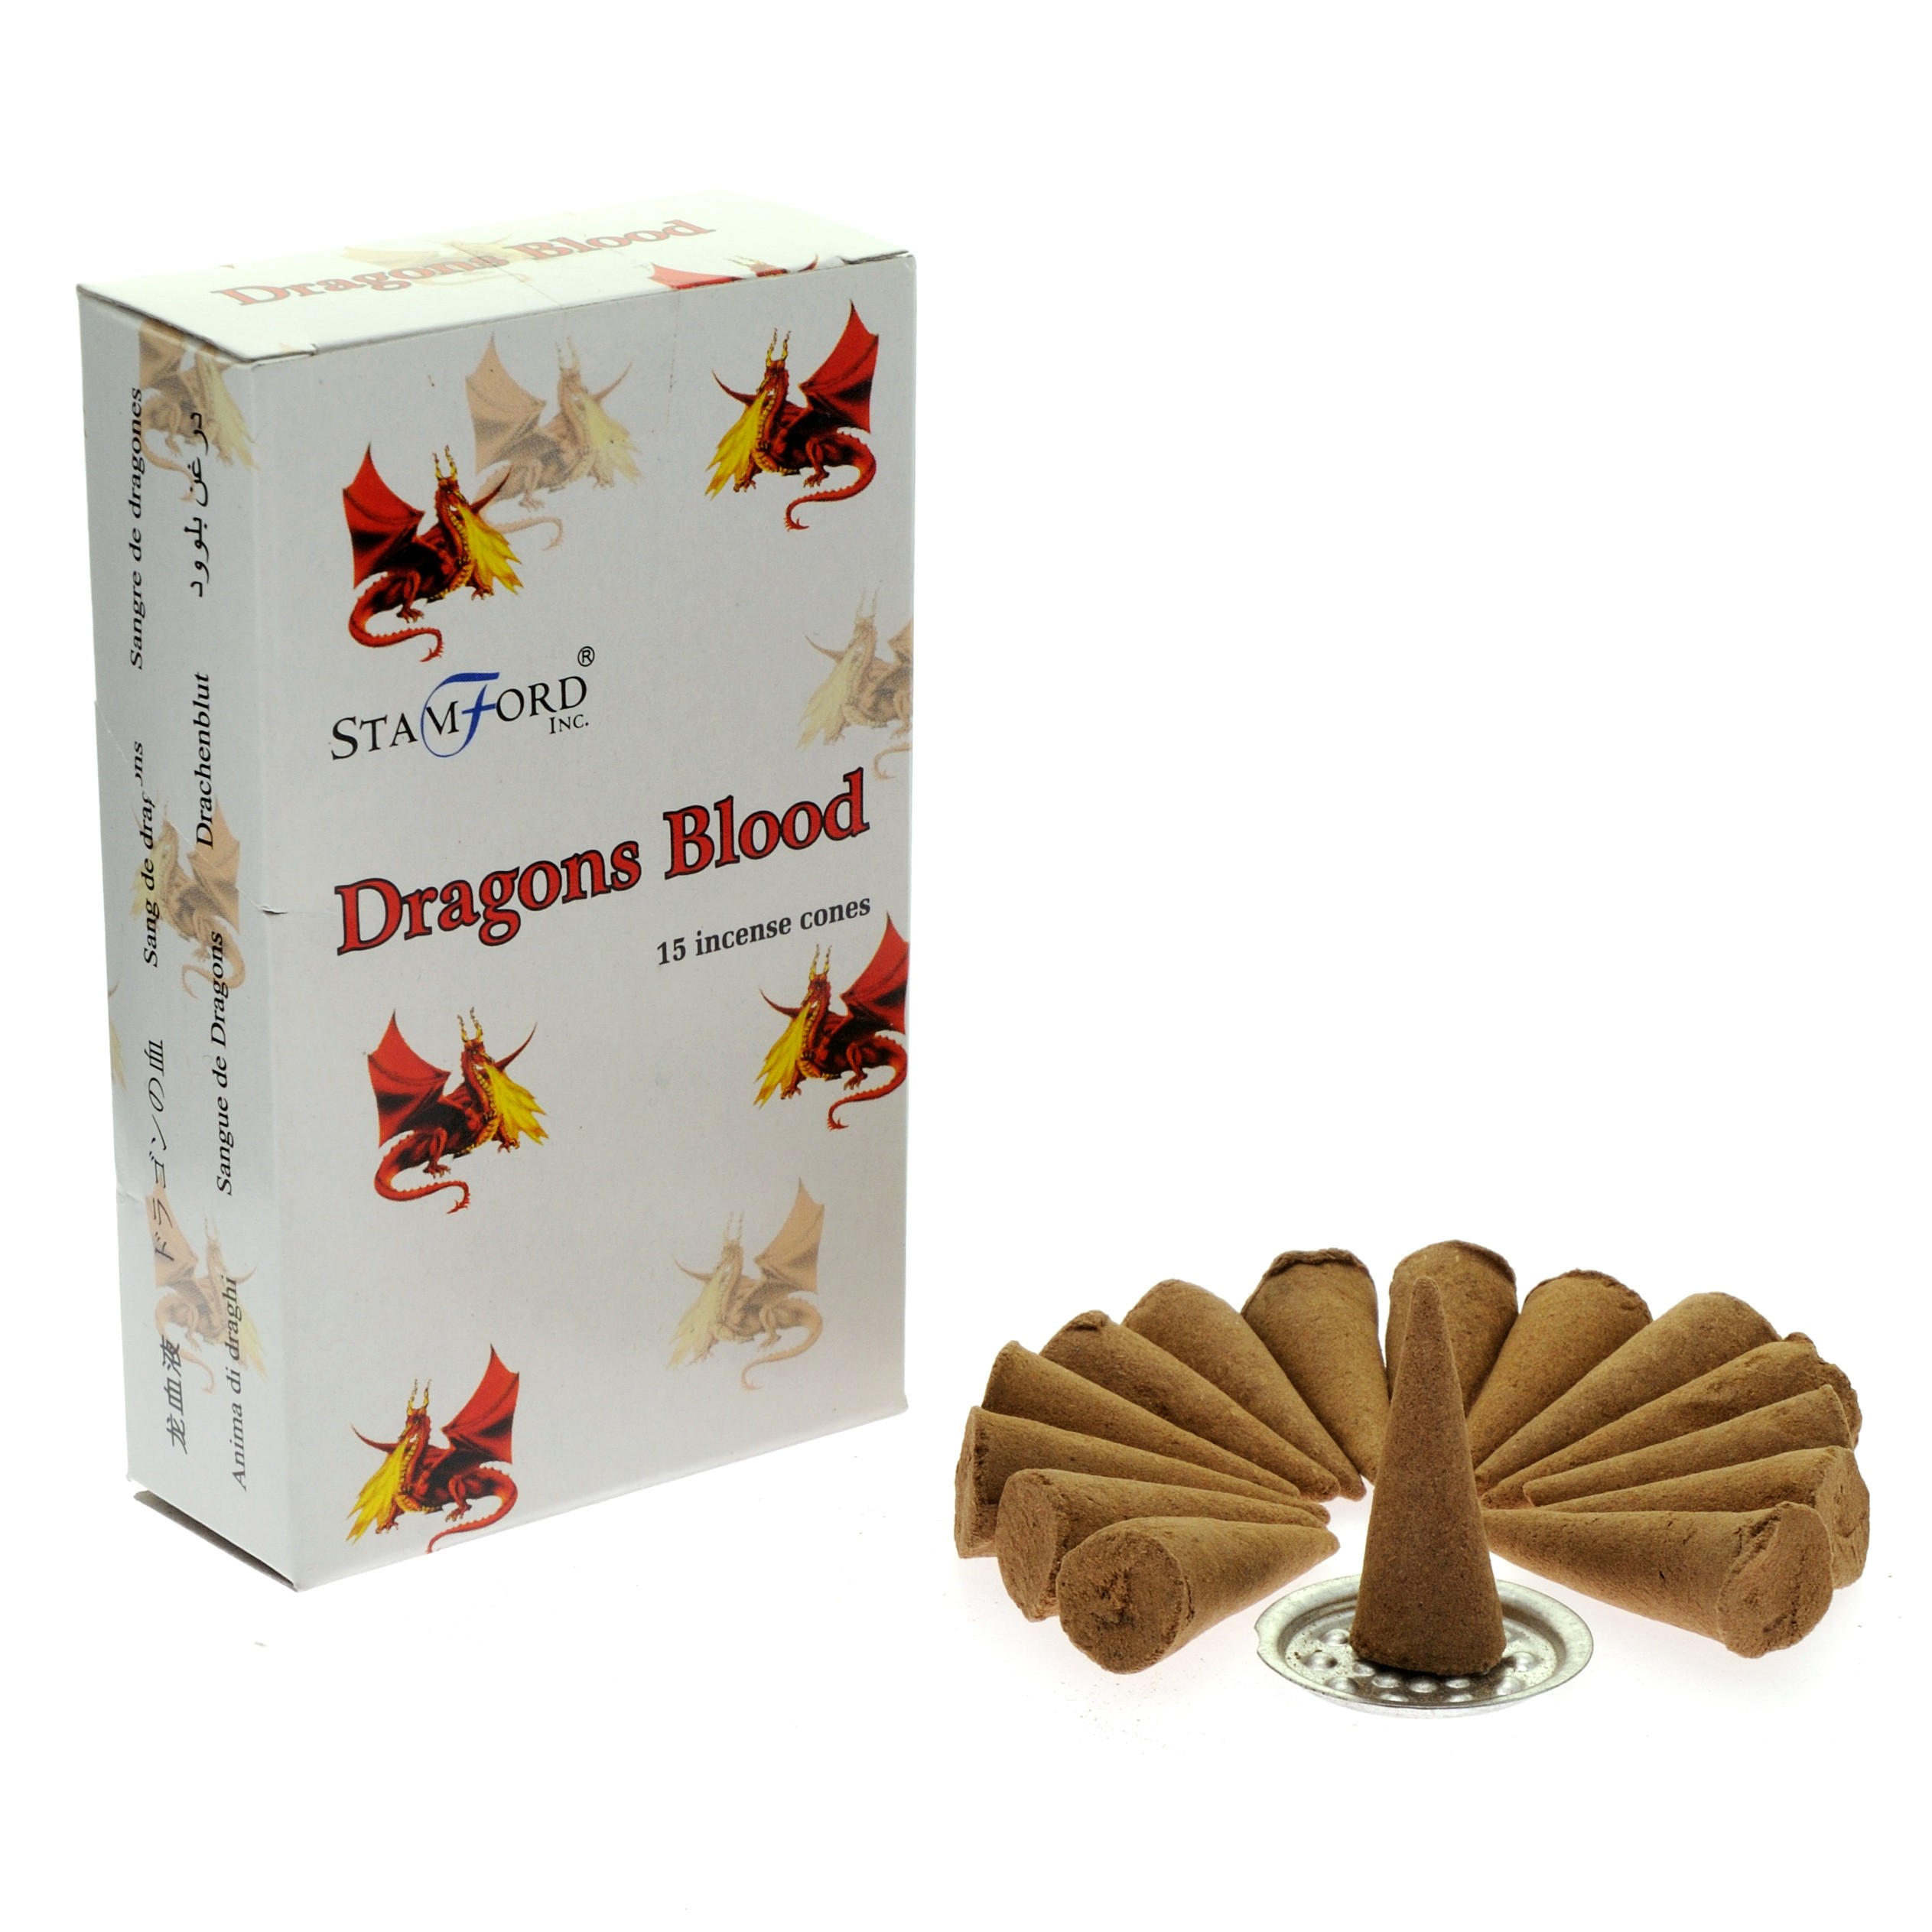 Dragons Blood Stamford Incense Cones and Metal Holder